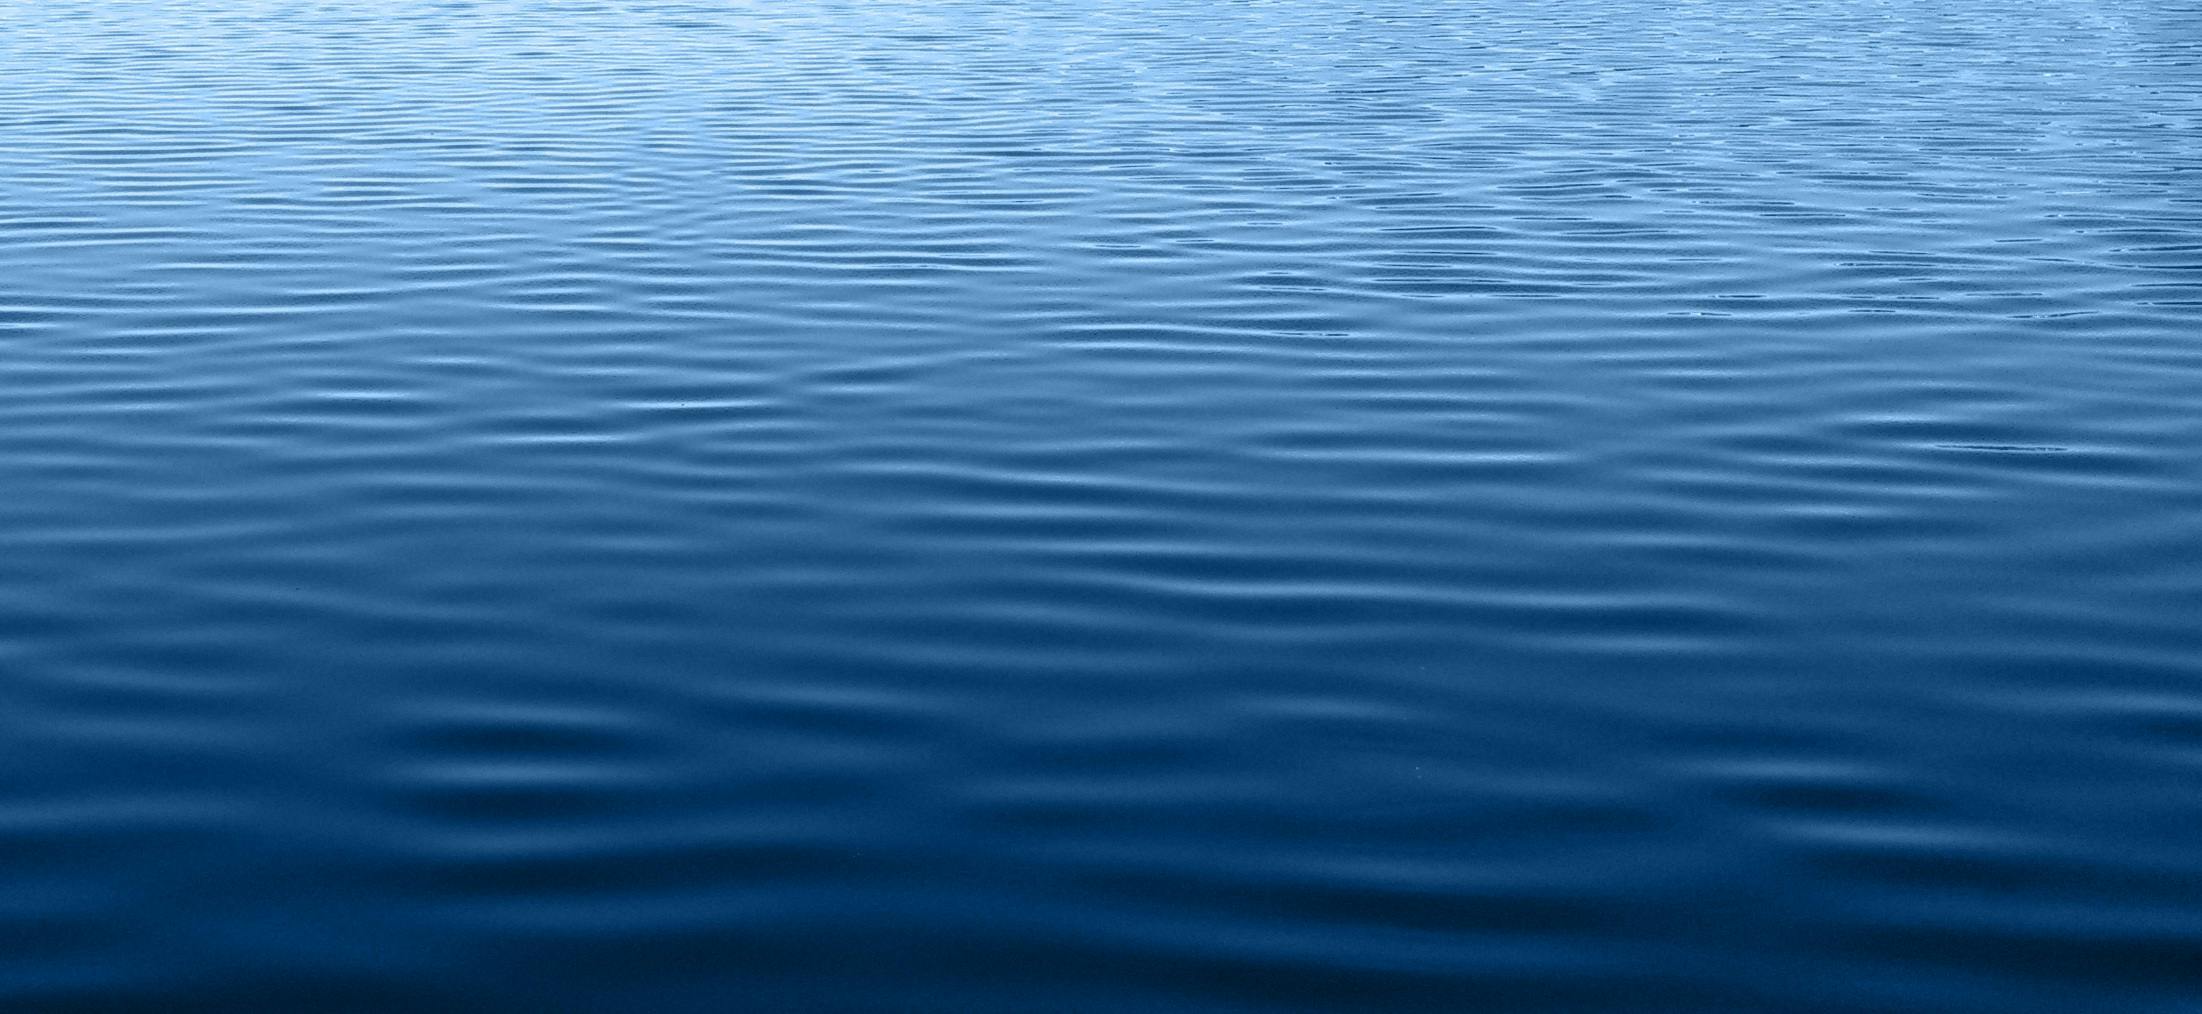 a large body of water with a boat in the distance, minimalism, swirly vibrant ripples, deep blues, zoomed in, crisp smooth lines